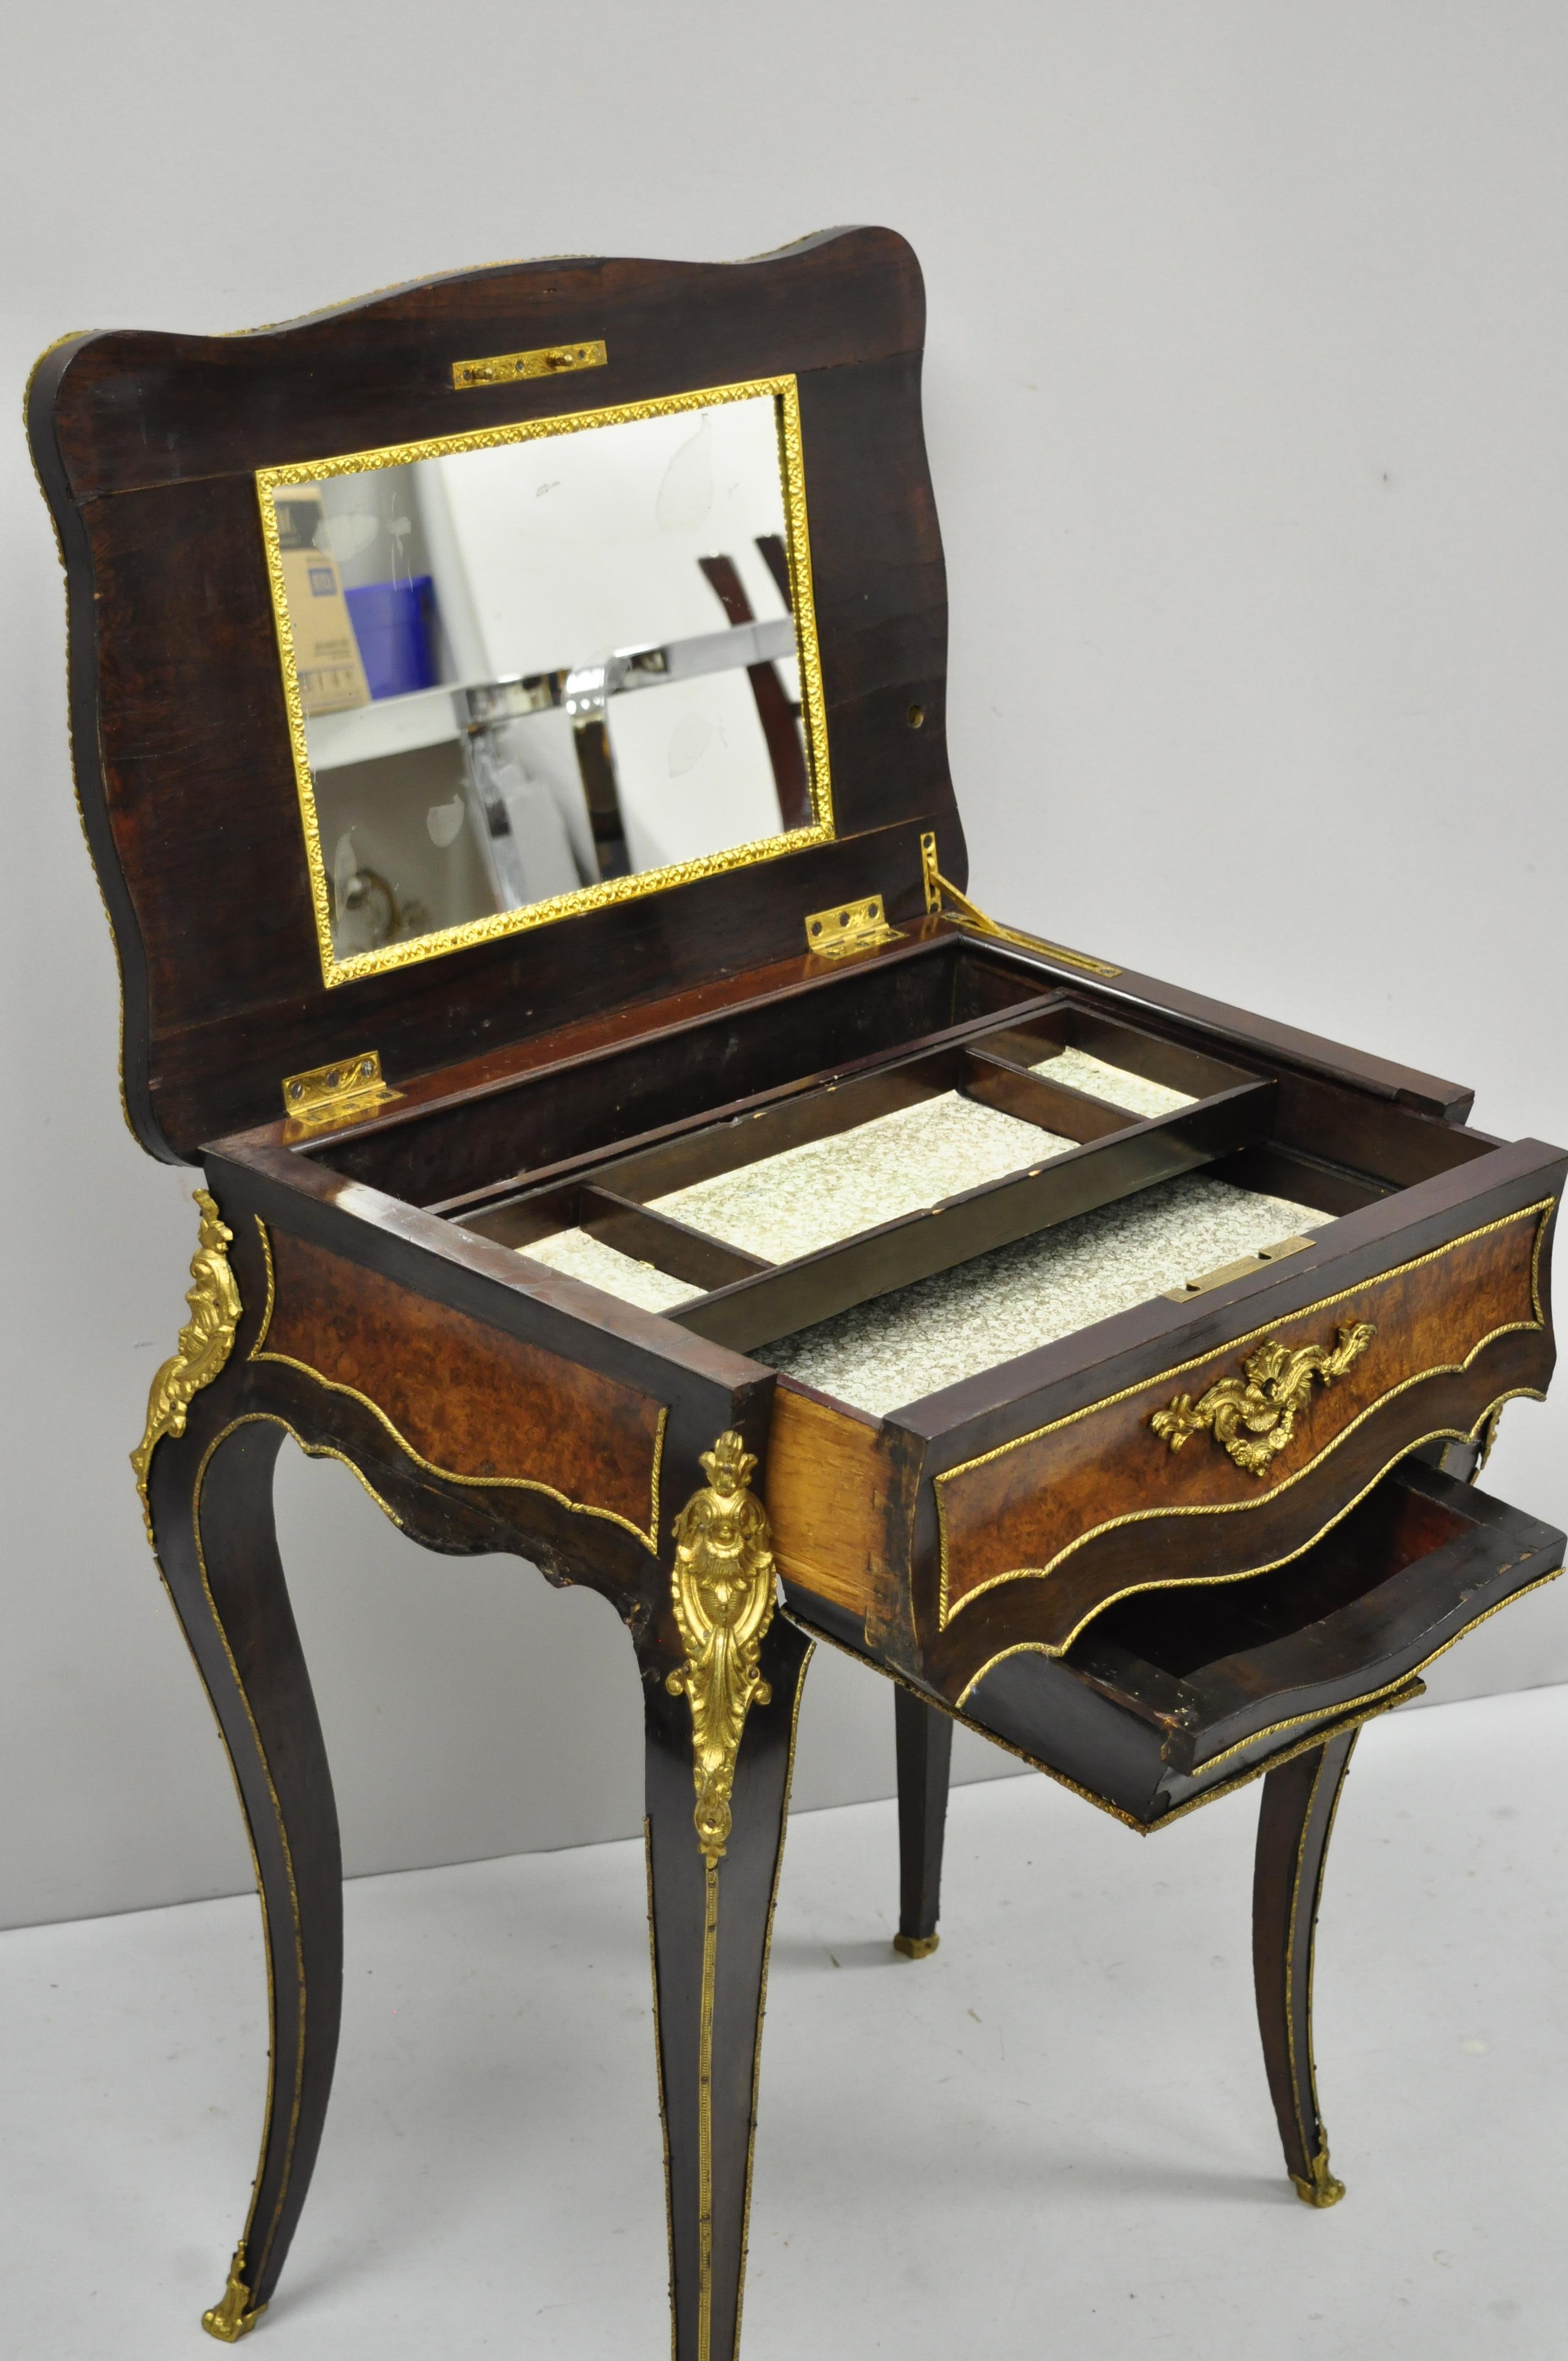 Maison Alphonse Giroux Paris Louis XV Ladies Work Table Sewing Vanity Stand In Good Condition For Sale In Philadelphia, PA